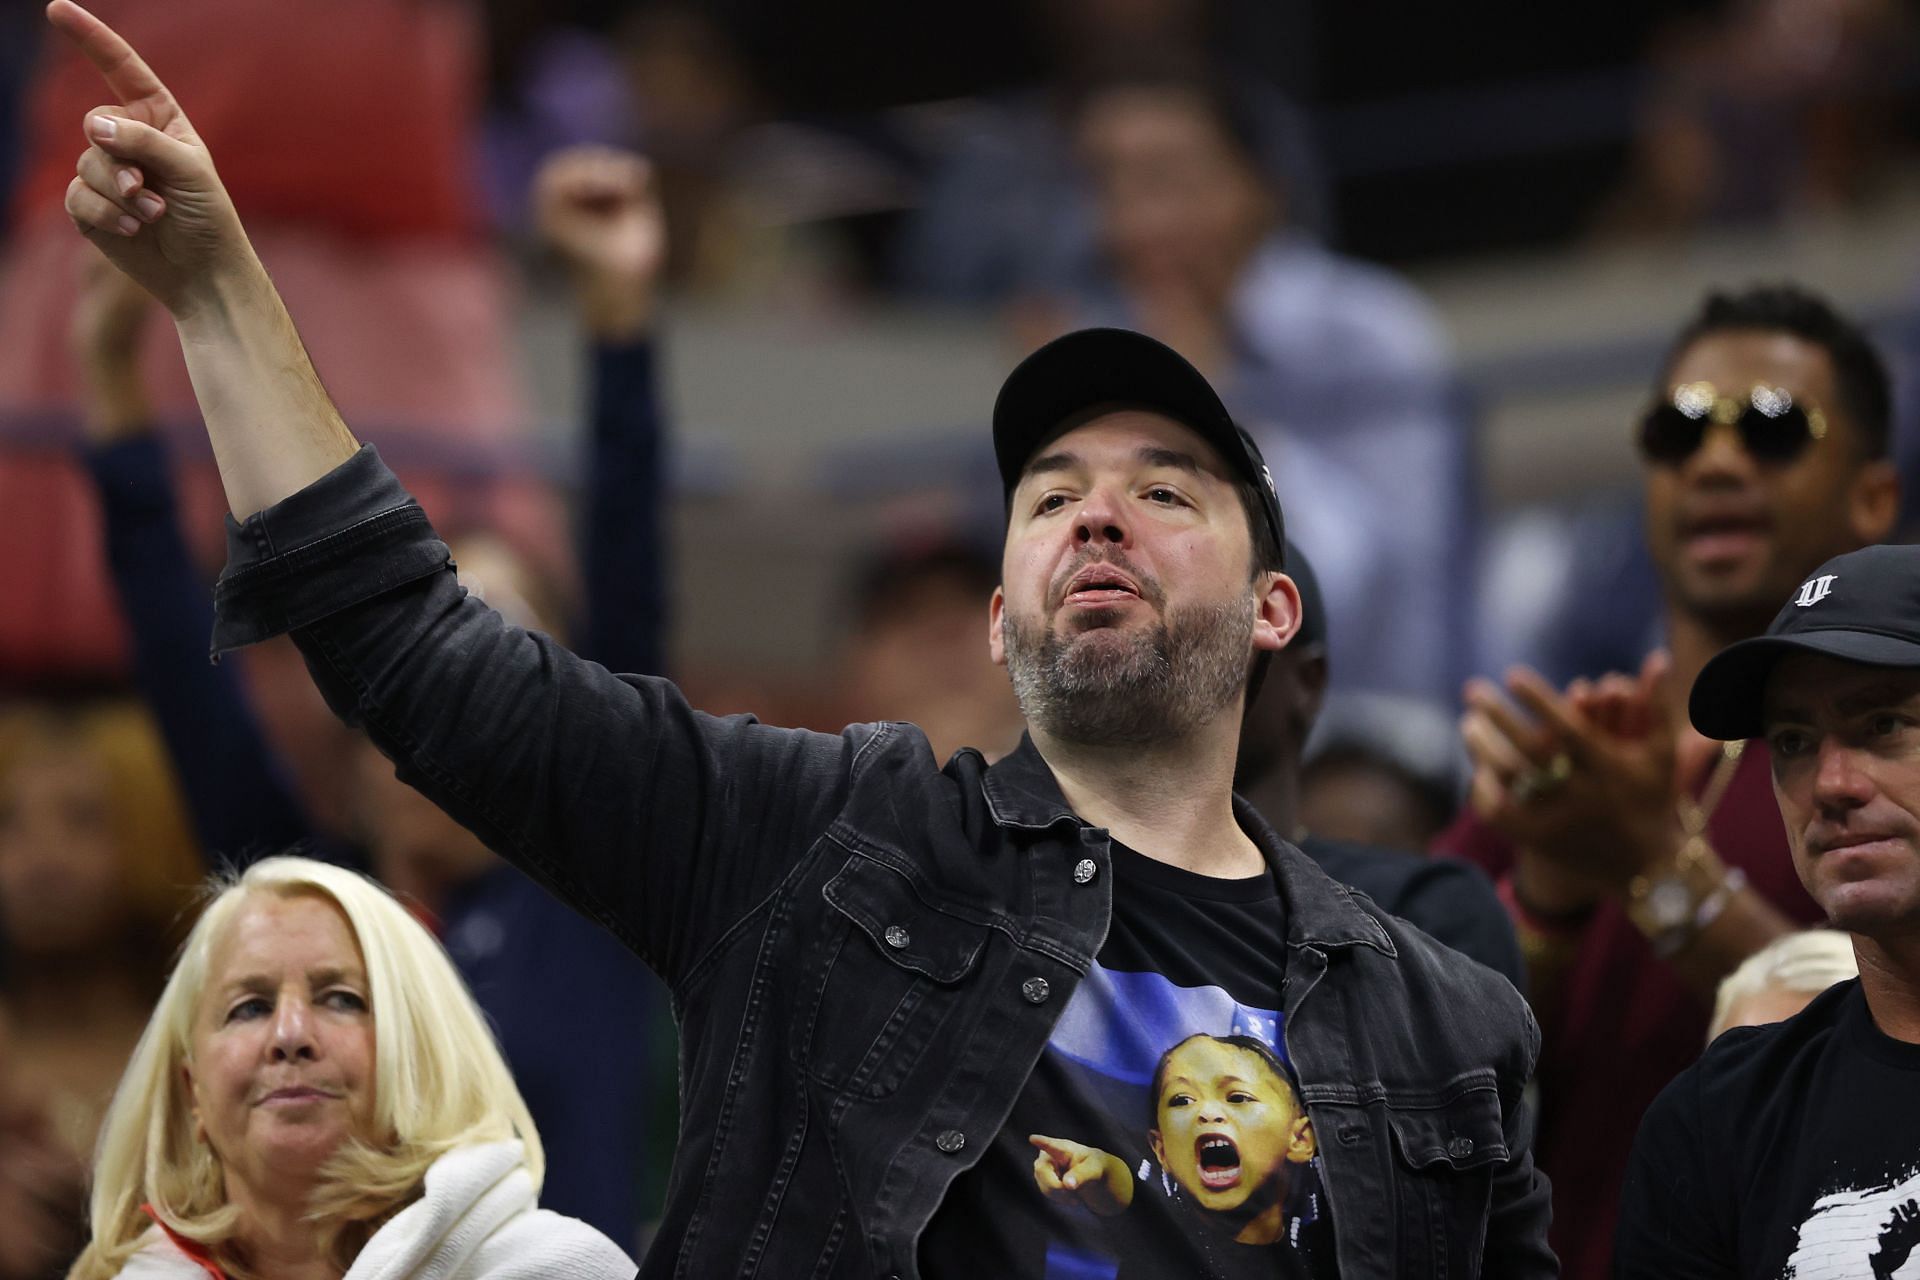 Alexis Ohanian watches Serena Williams play at the 2022 US Open.